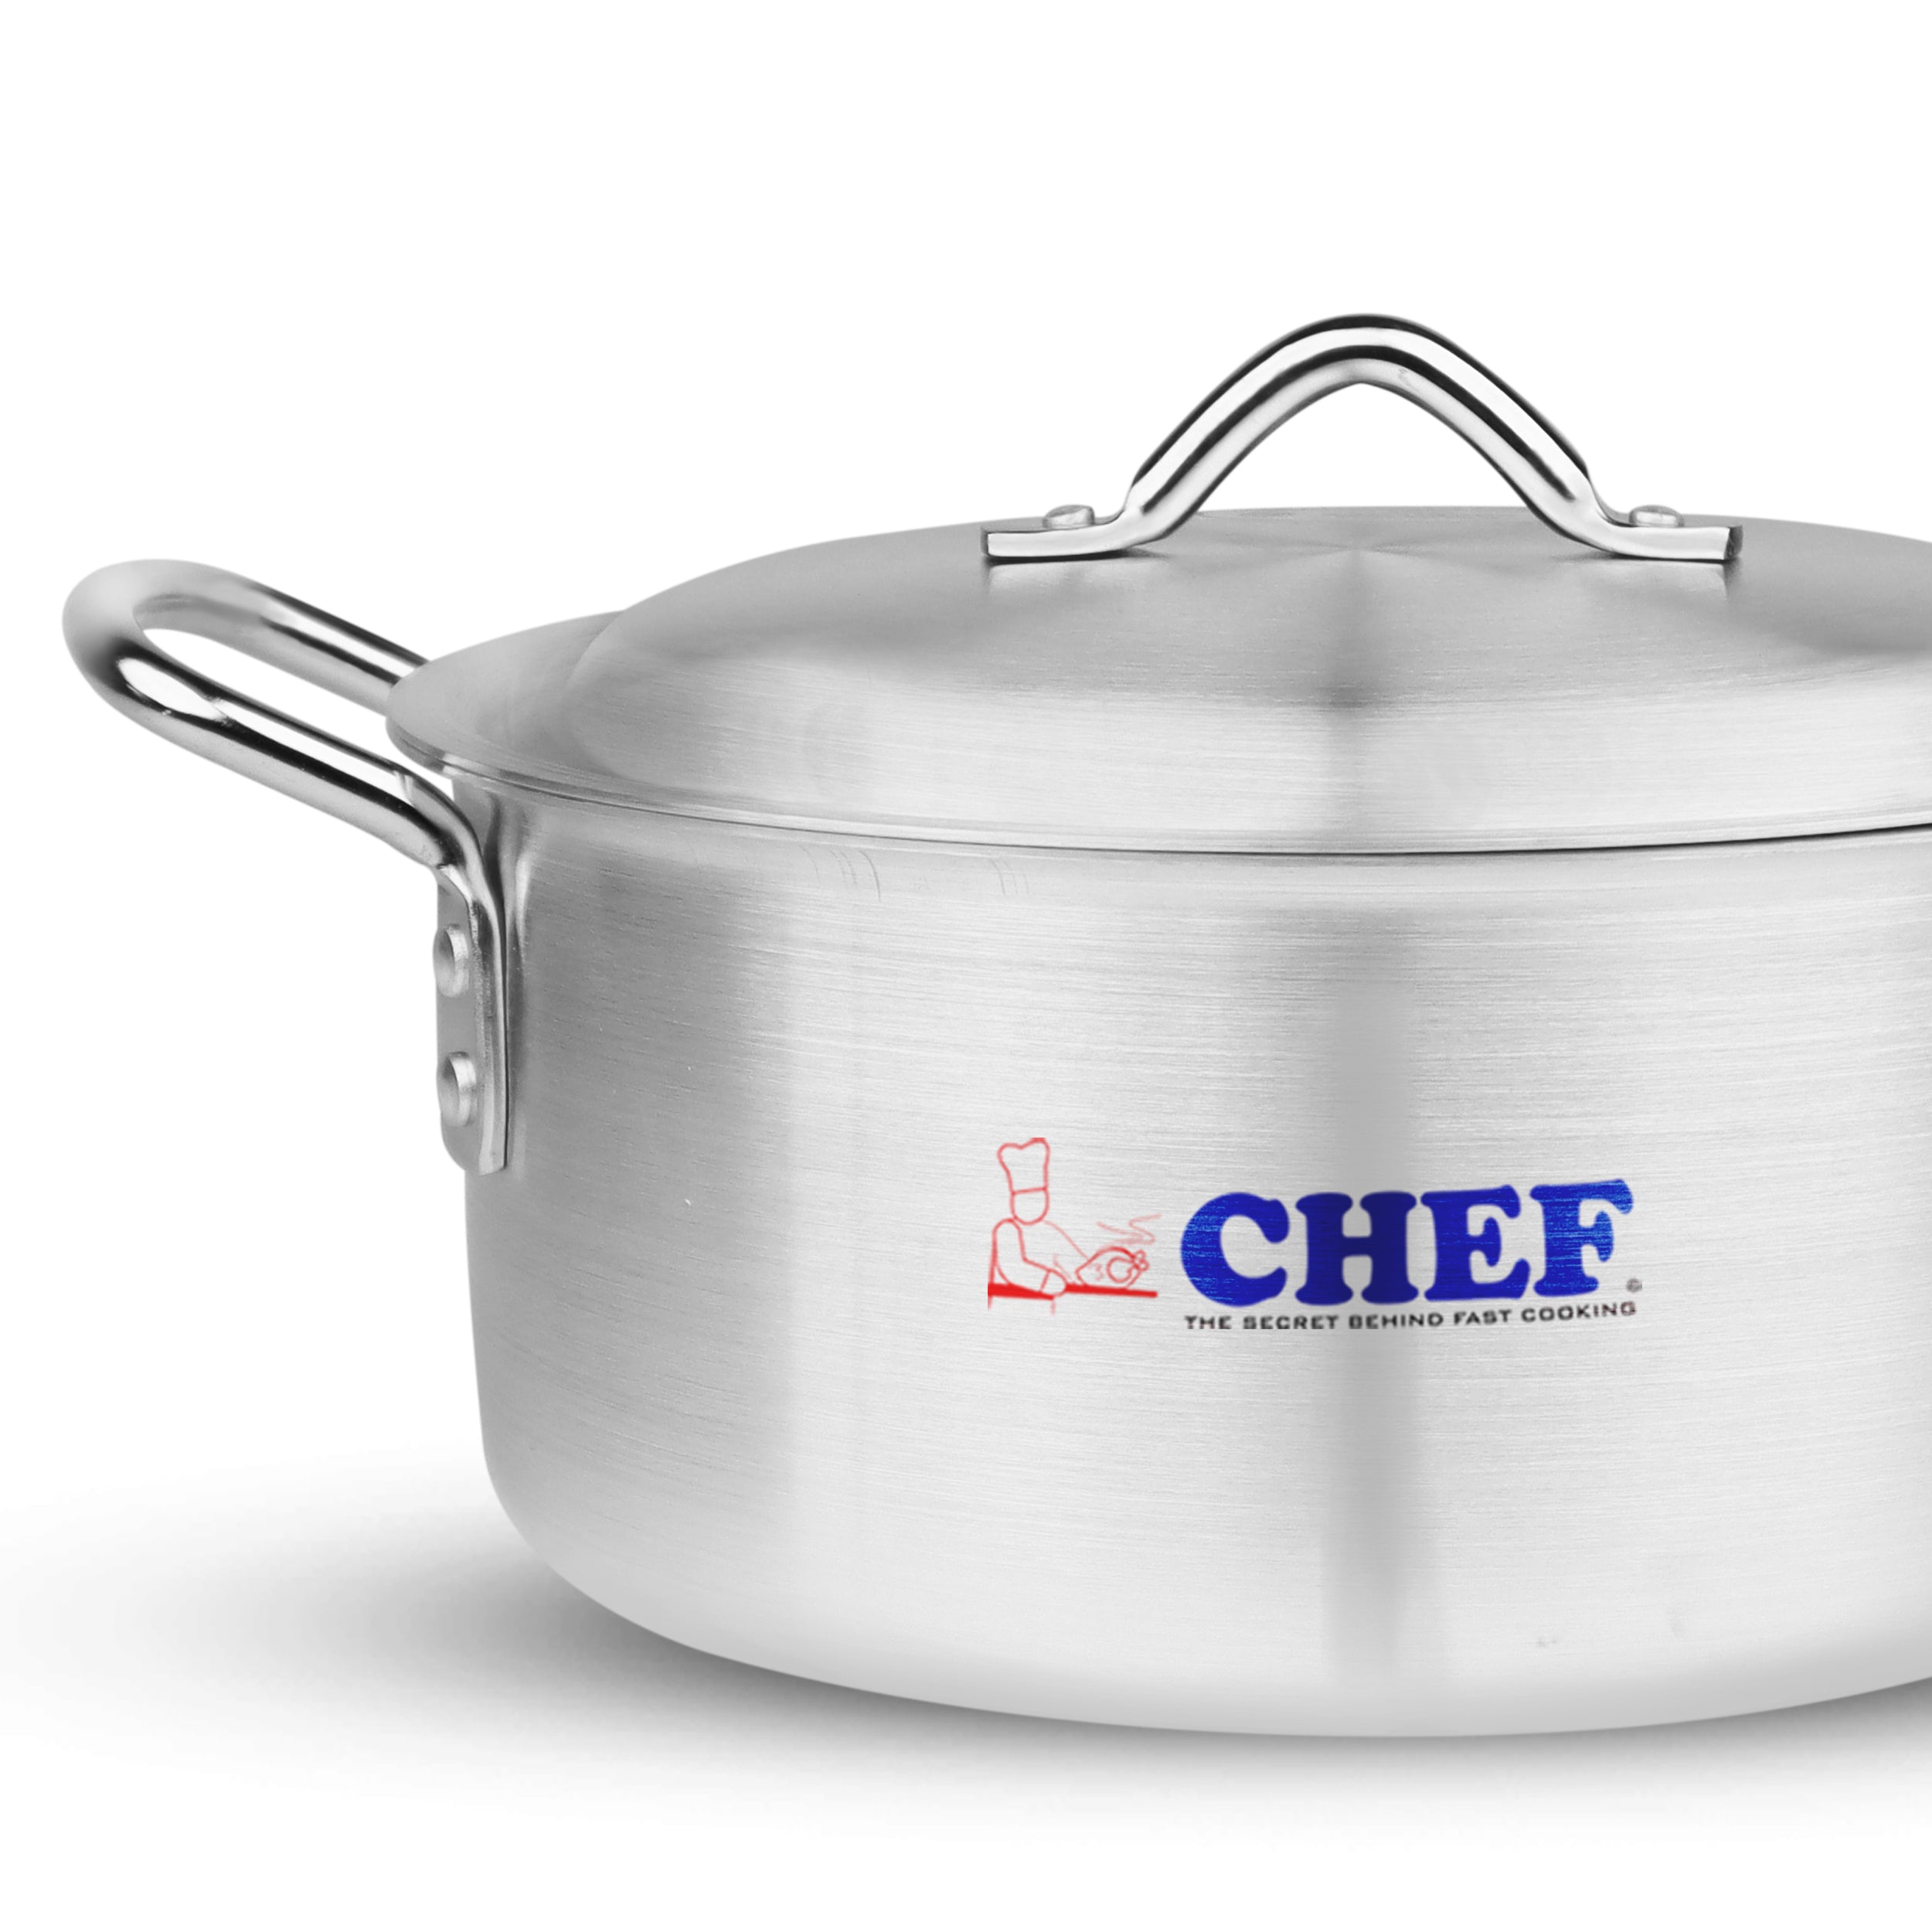 majestic chef best quality aluminum alloy metal 4 pcs casserole set / cooking pot set with silver lid at best price in Pakistan